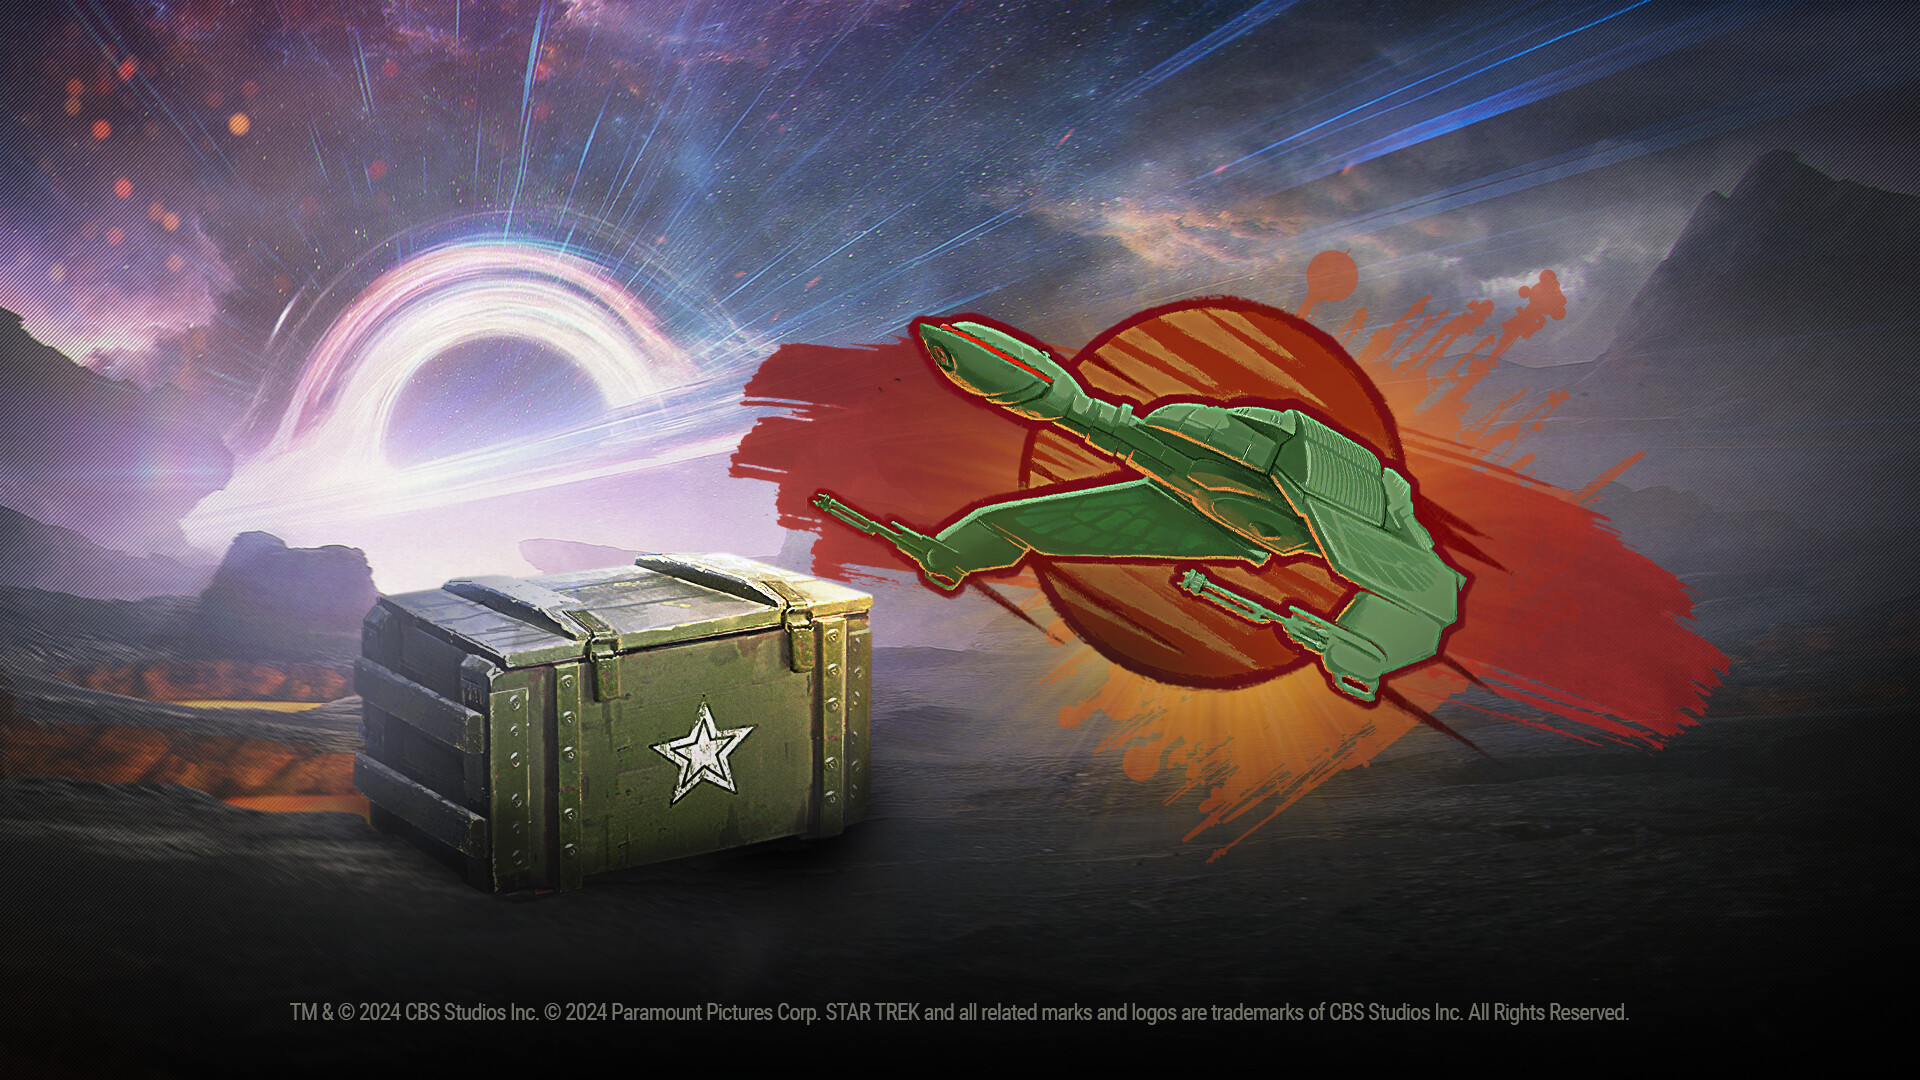 World of Tanks — "Final Frontier" Pack - Win - (Steam)